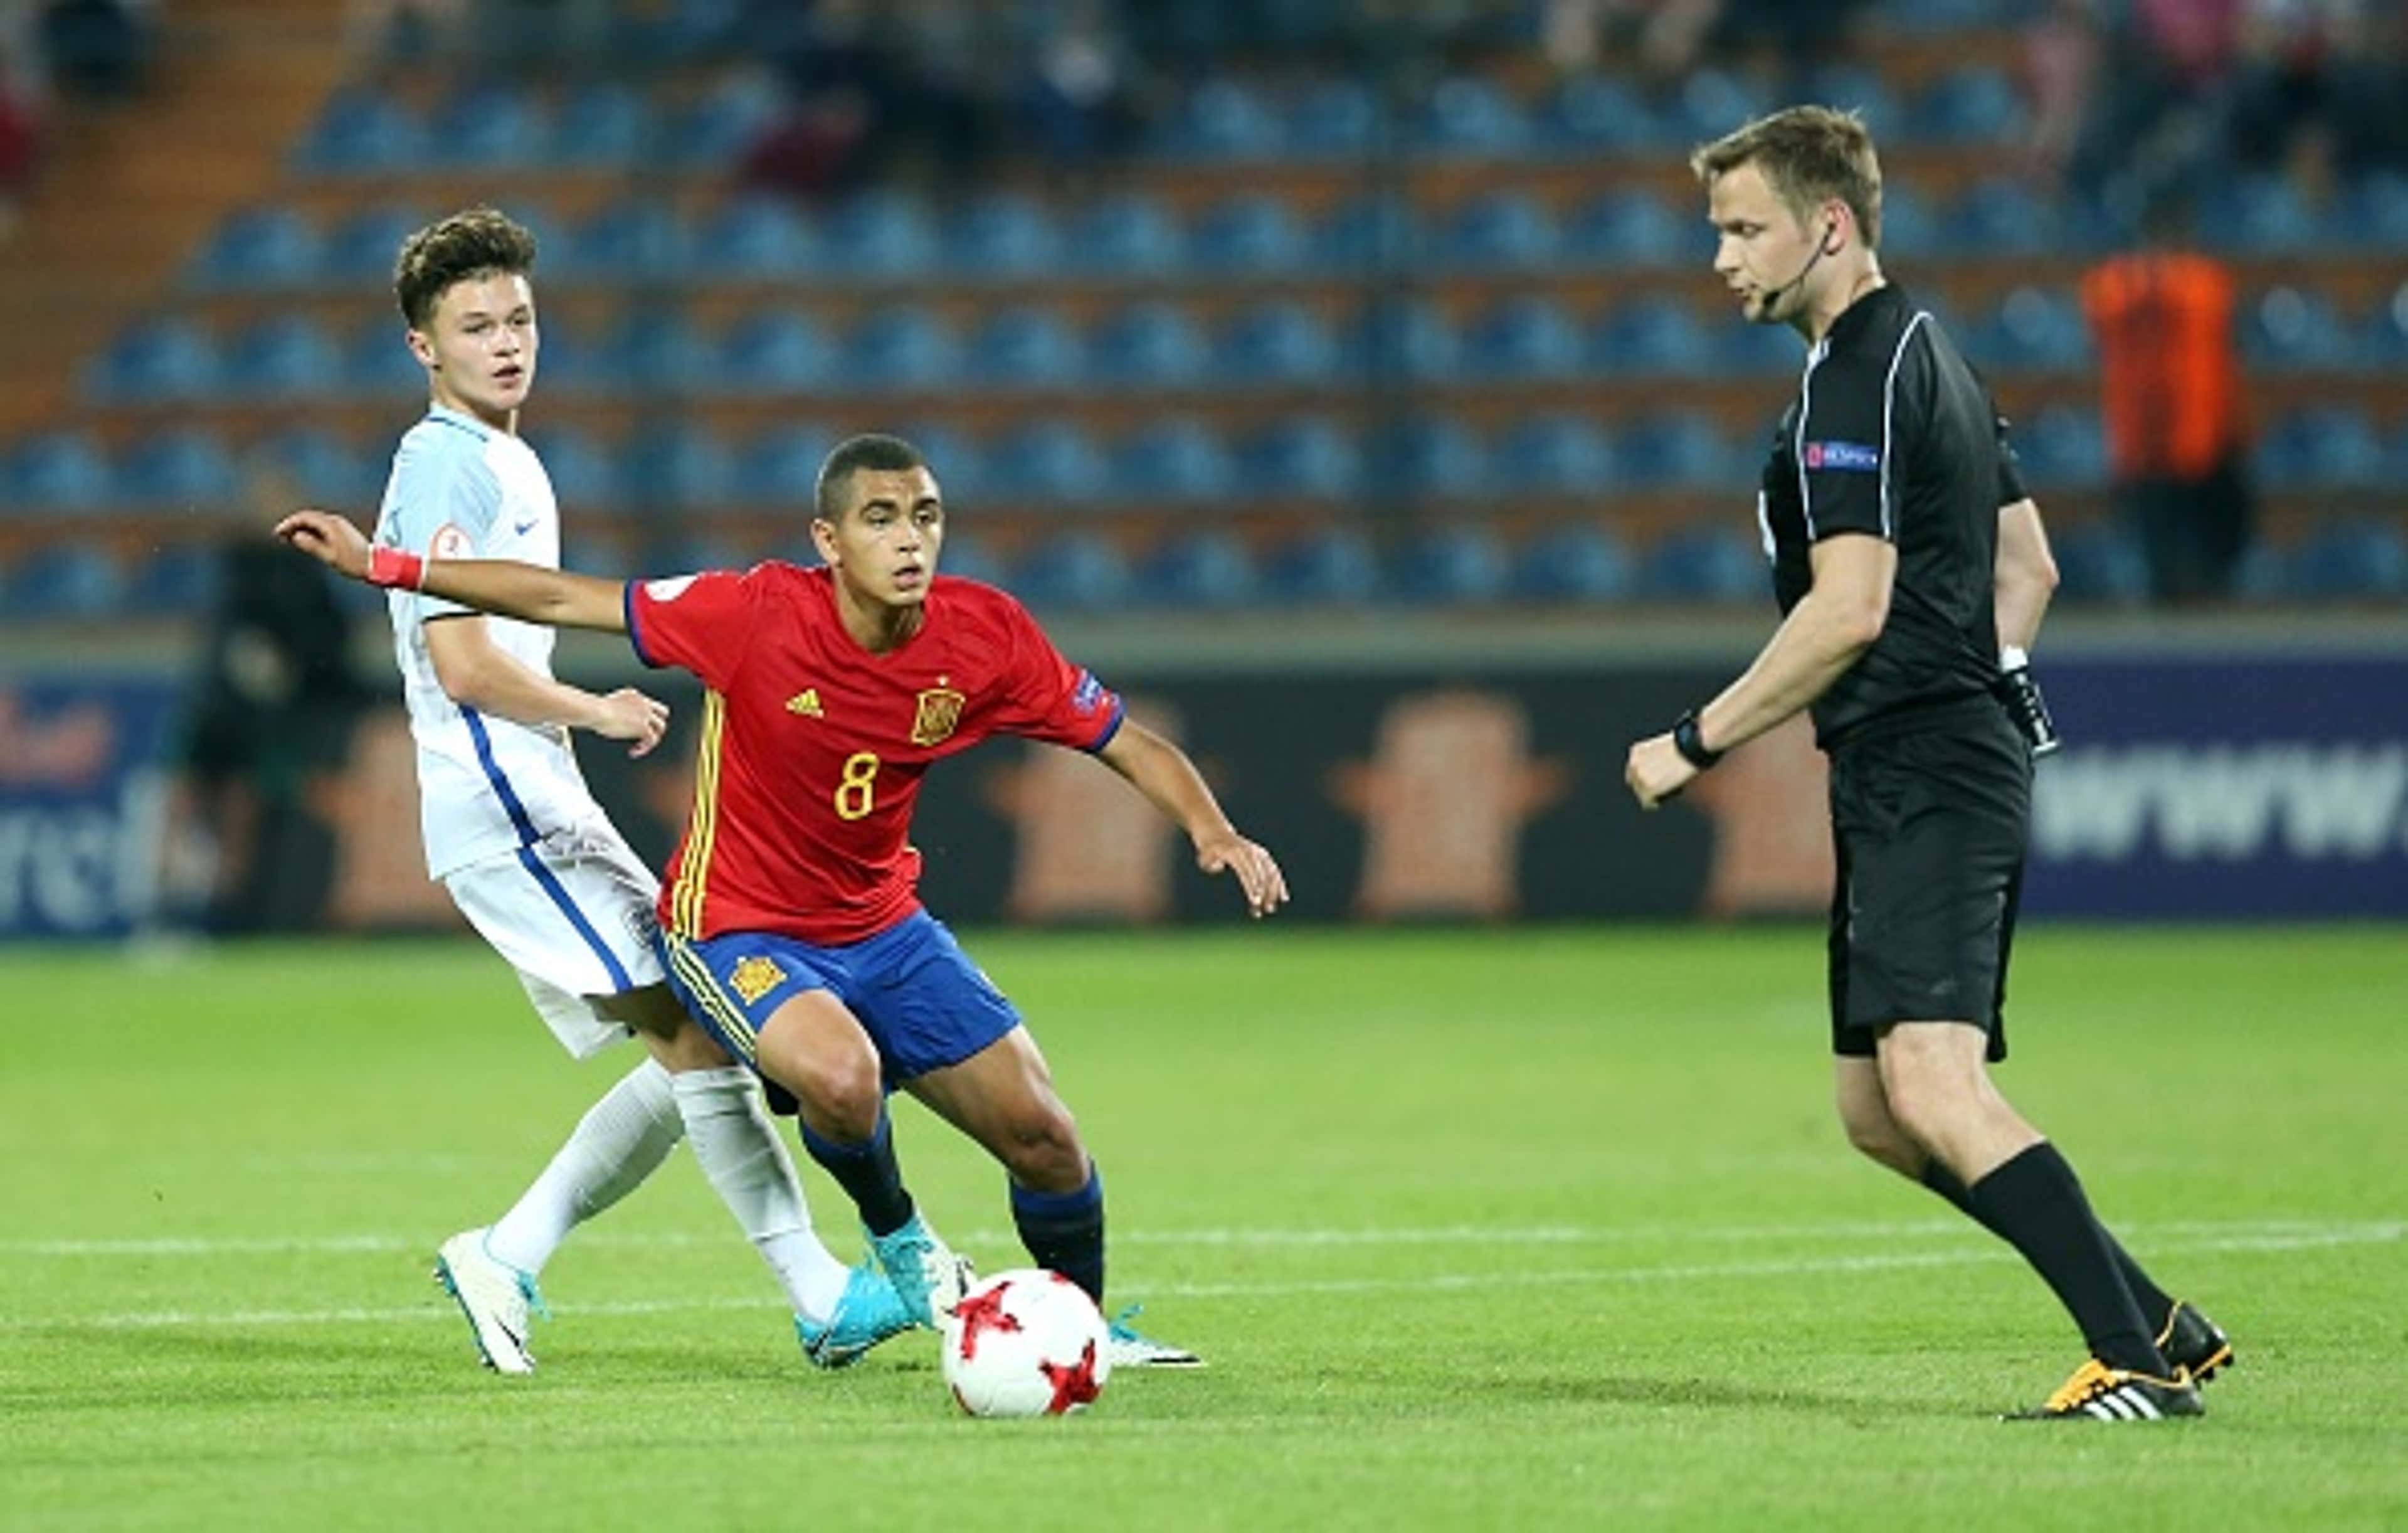 FIFA U17 World Cup 2017 Team Profile All you need to know about Spain